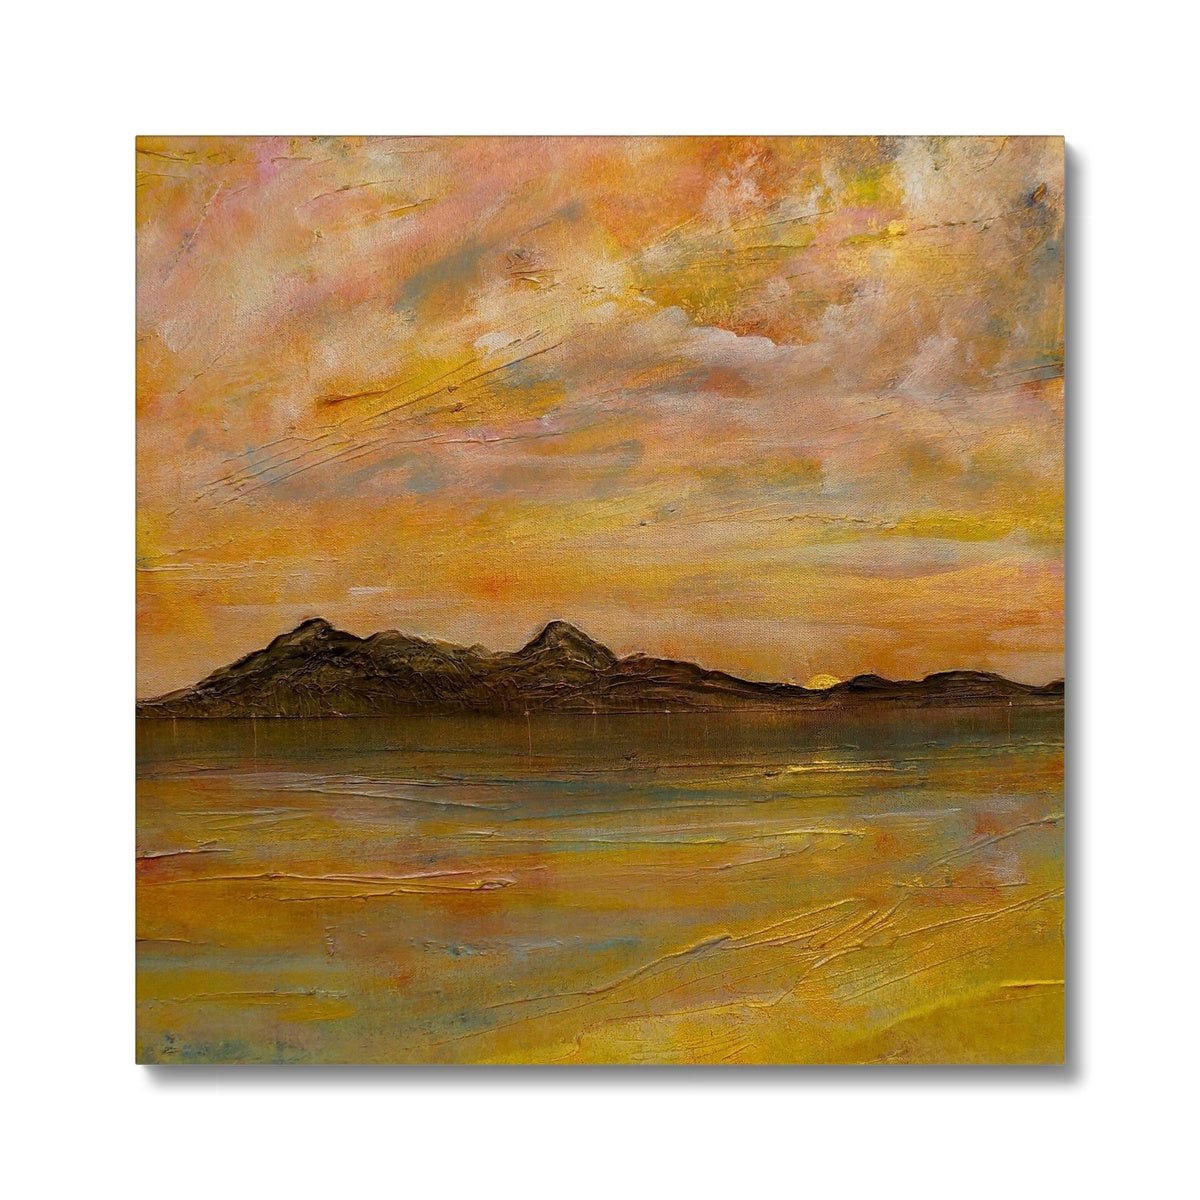 Arran Dusk Painting | Canvas From Scotland-Contemporary Stretched Canvas Prints-Arran Art Gallery-24"x24"-Paintings, Prints, Homeware, Art Gifts From Scotland By Scottish Artist Kevin Hunter